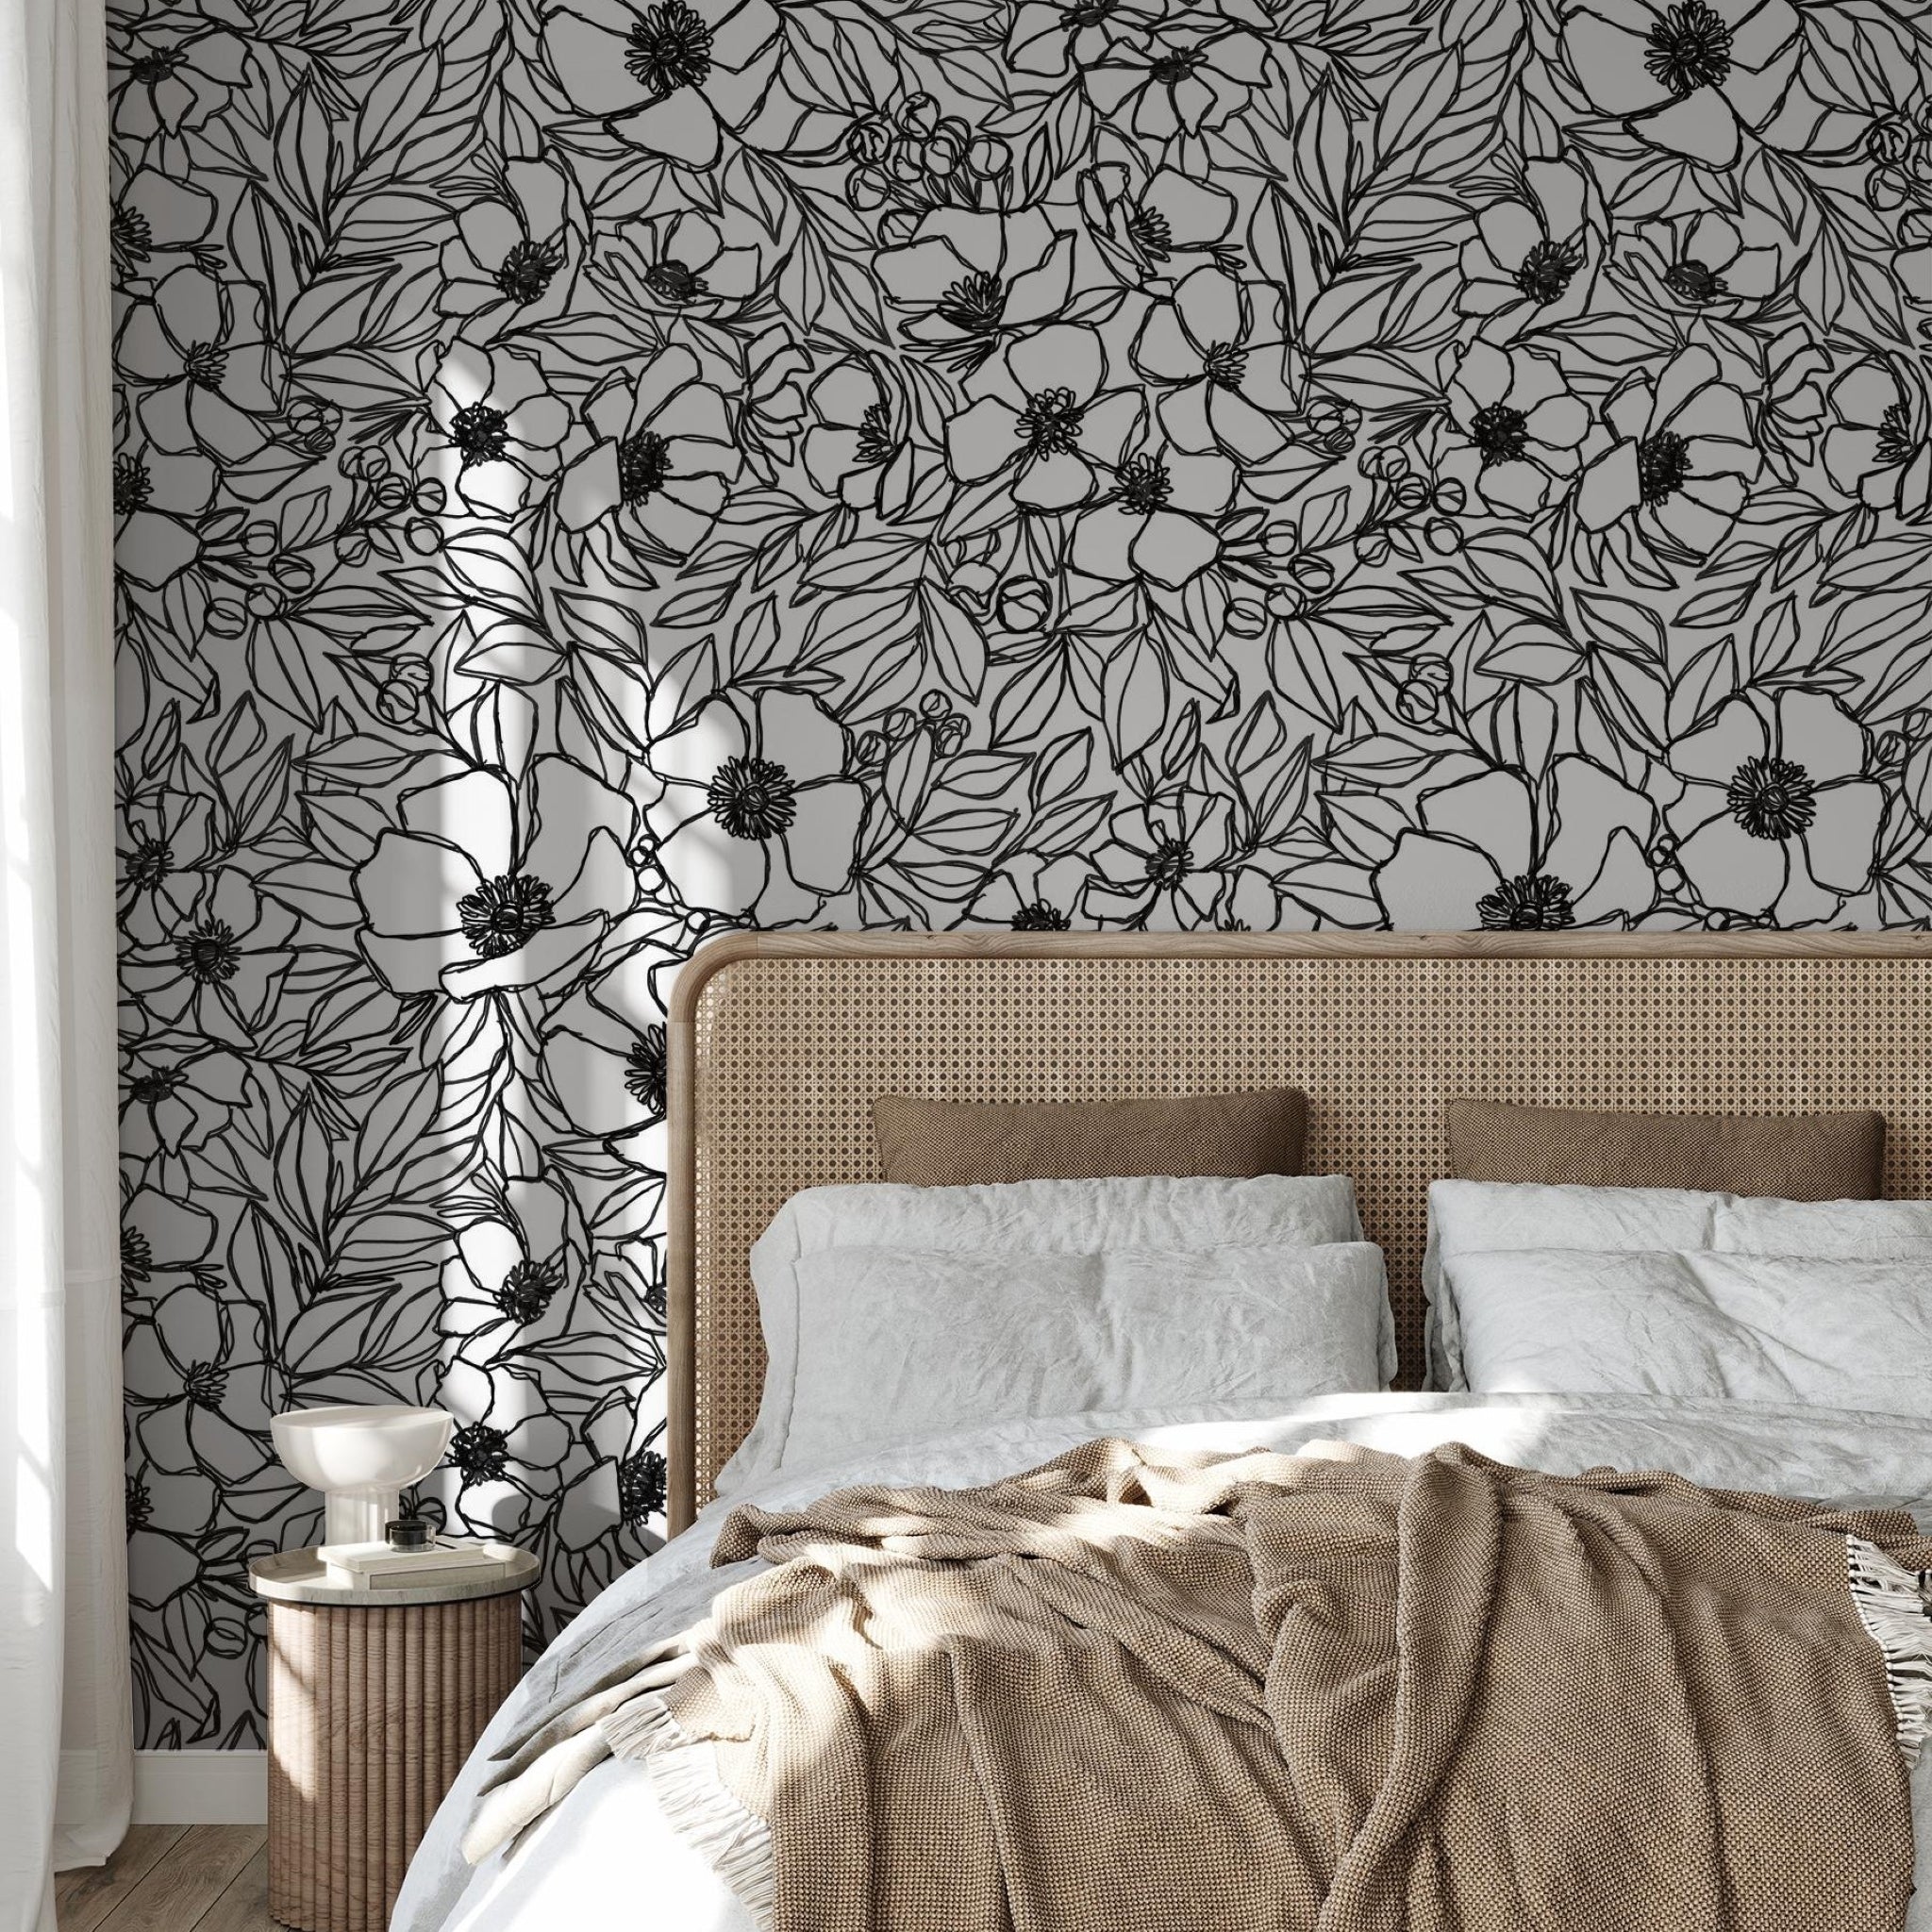 "Wall Blush's Inked Blossom Wallpaper accentuates the cozy bedroom, highlighting the elegant floral design."